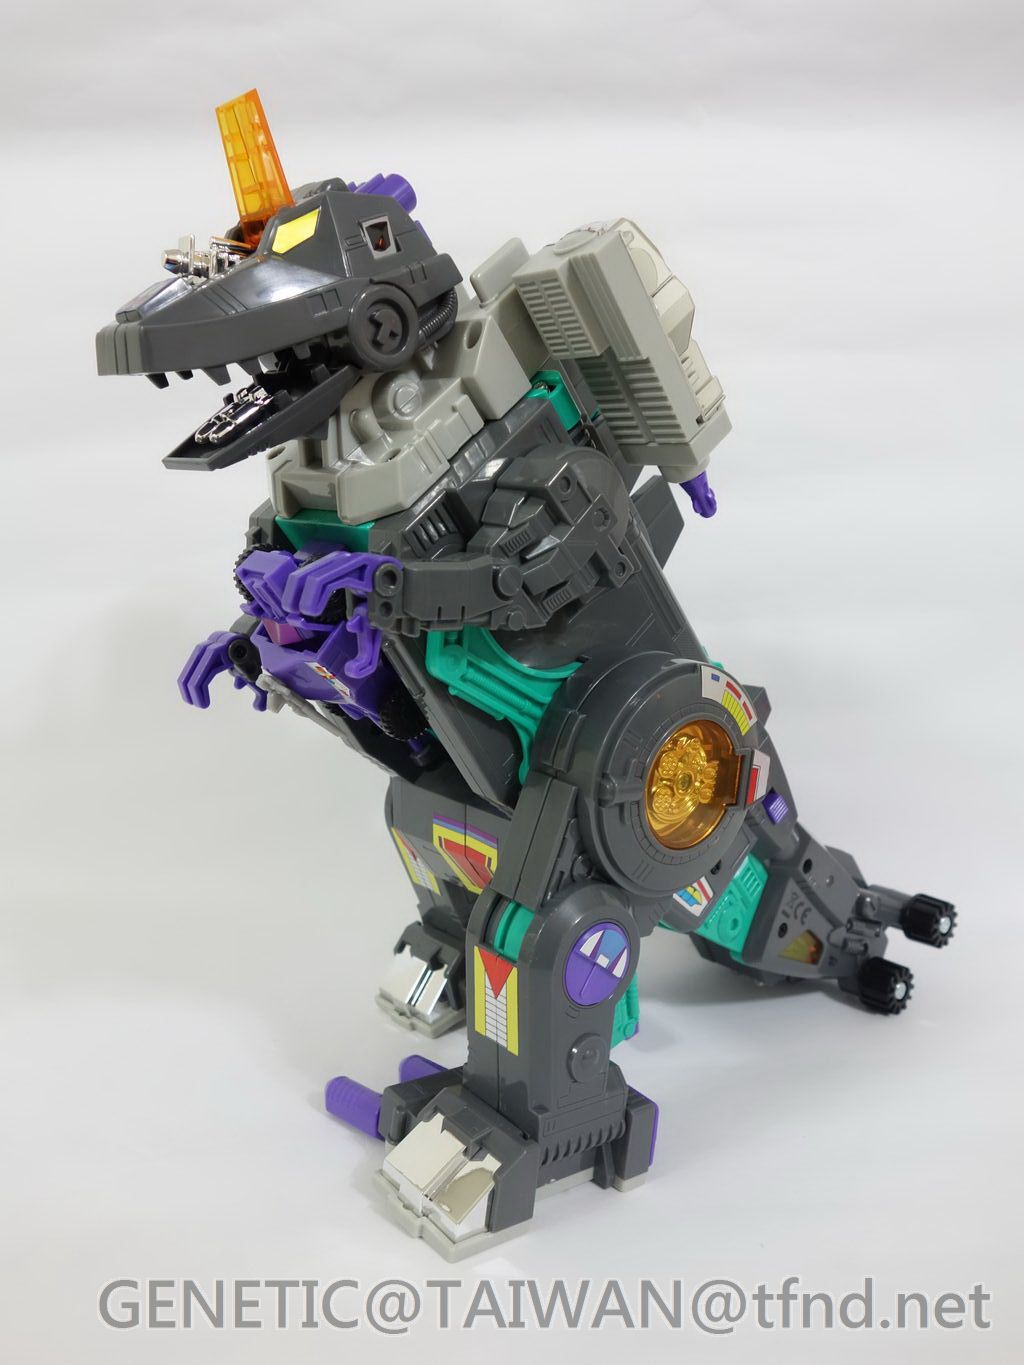 NEW Transformers Platinum Edition Trypticon Figure G1 Reissue 2 DAY GET 